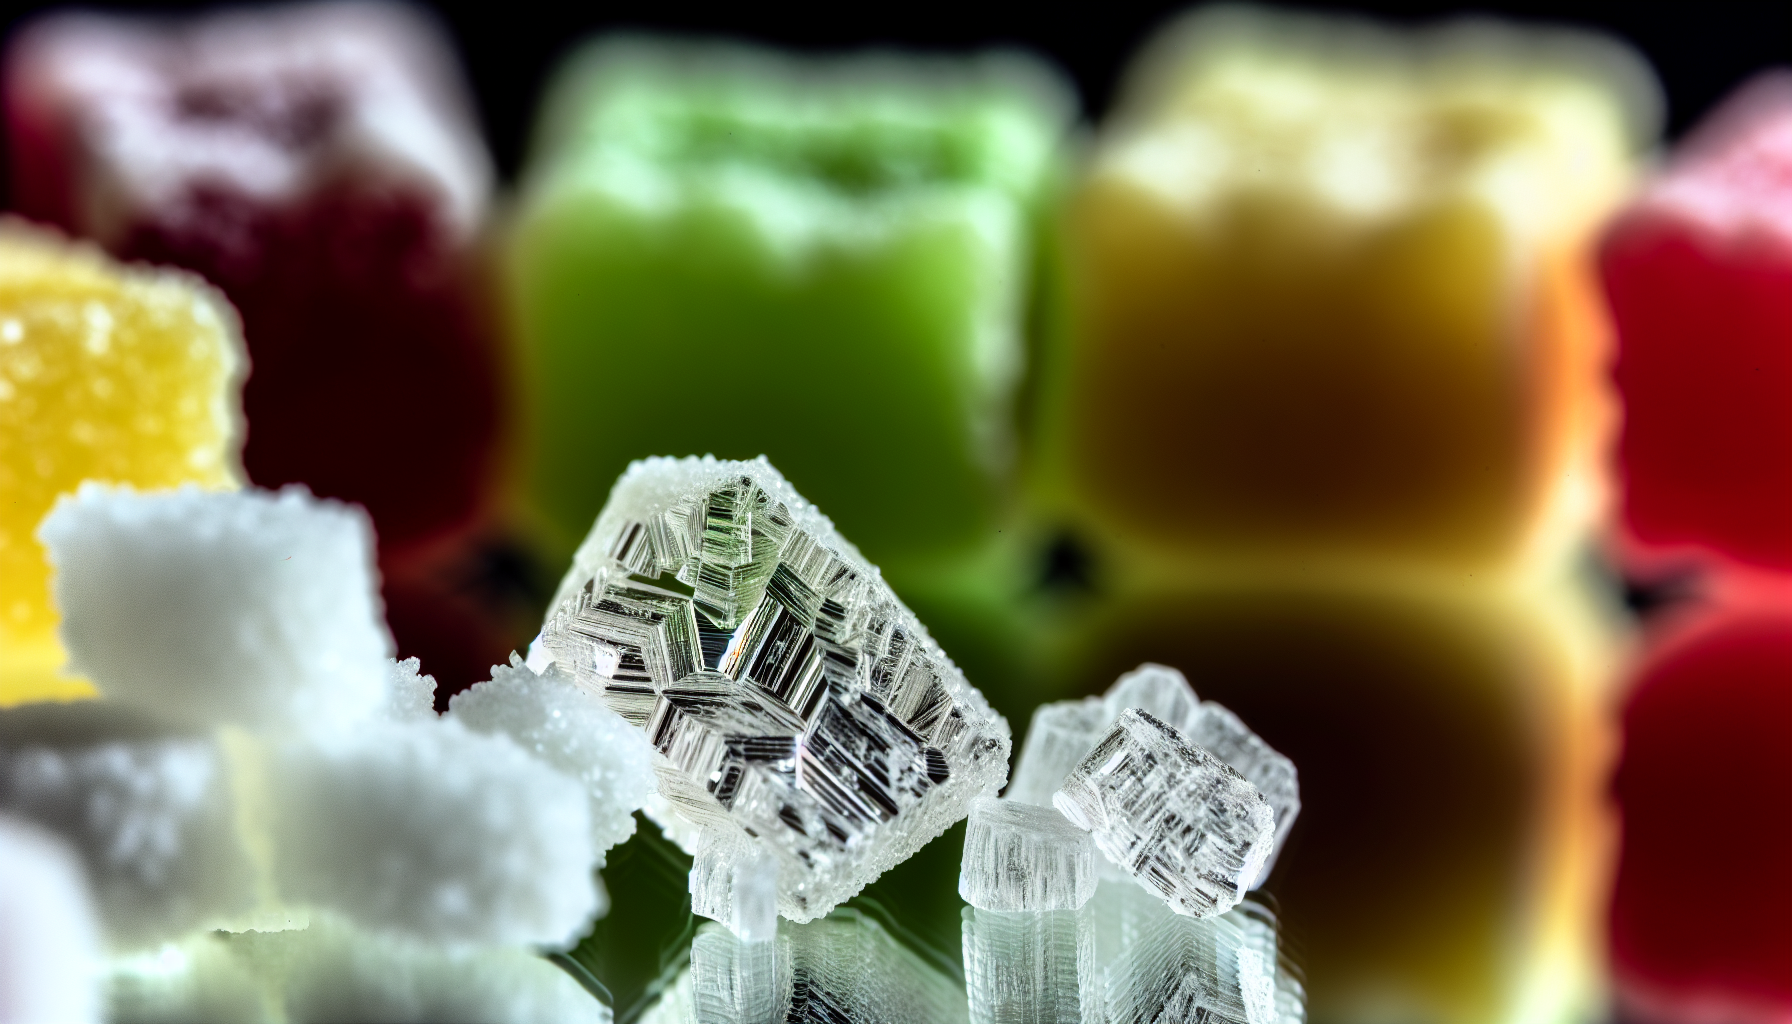 Close-up of sugar crystals, highlighting sugar content in wine gums